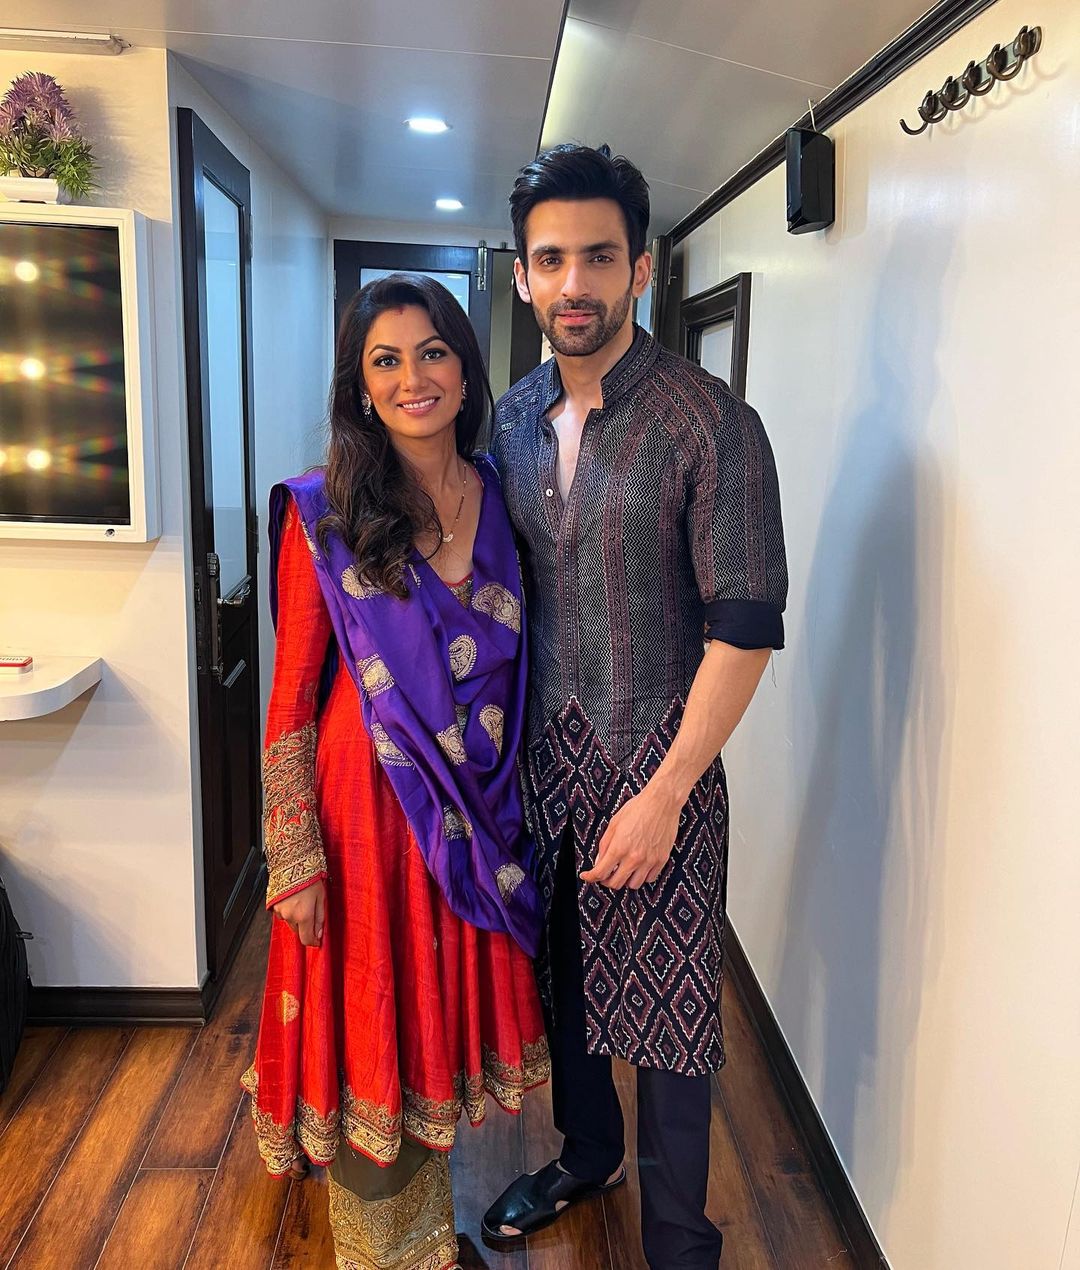 Excellent Actor Arjit Taneja And Sriti Jha Are Star In A New Show Kaise Mejhe Tum Mil Gaye. It’s A Show About Conflict Views On Relationships 